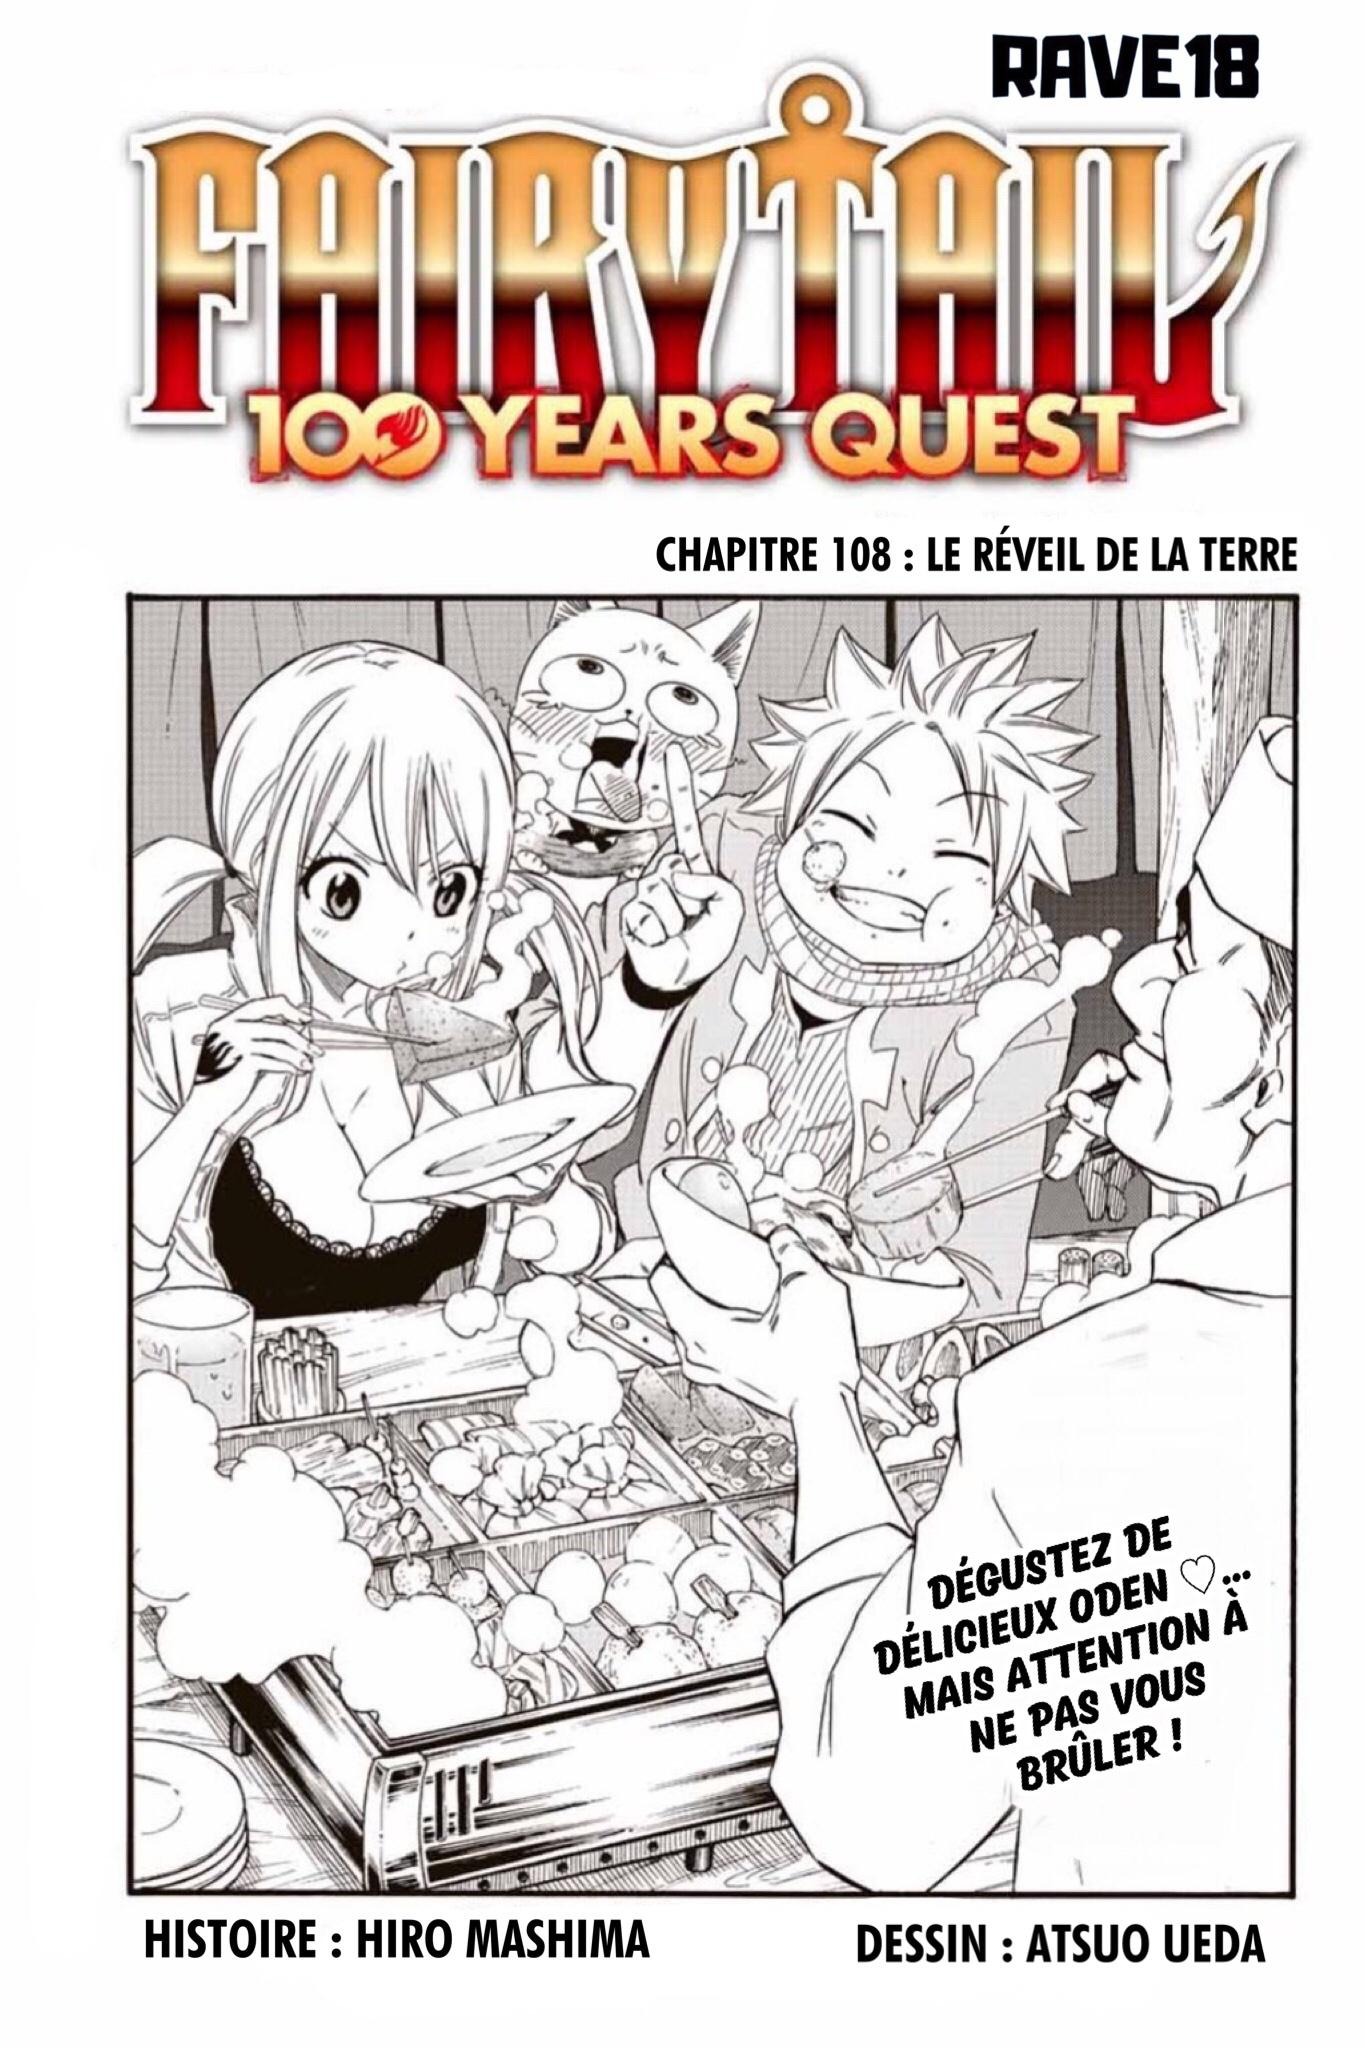 Fairy Tail 100 Years Quest: Chapter chapitre-108 - Page 1